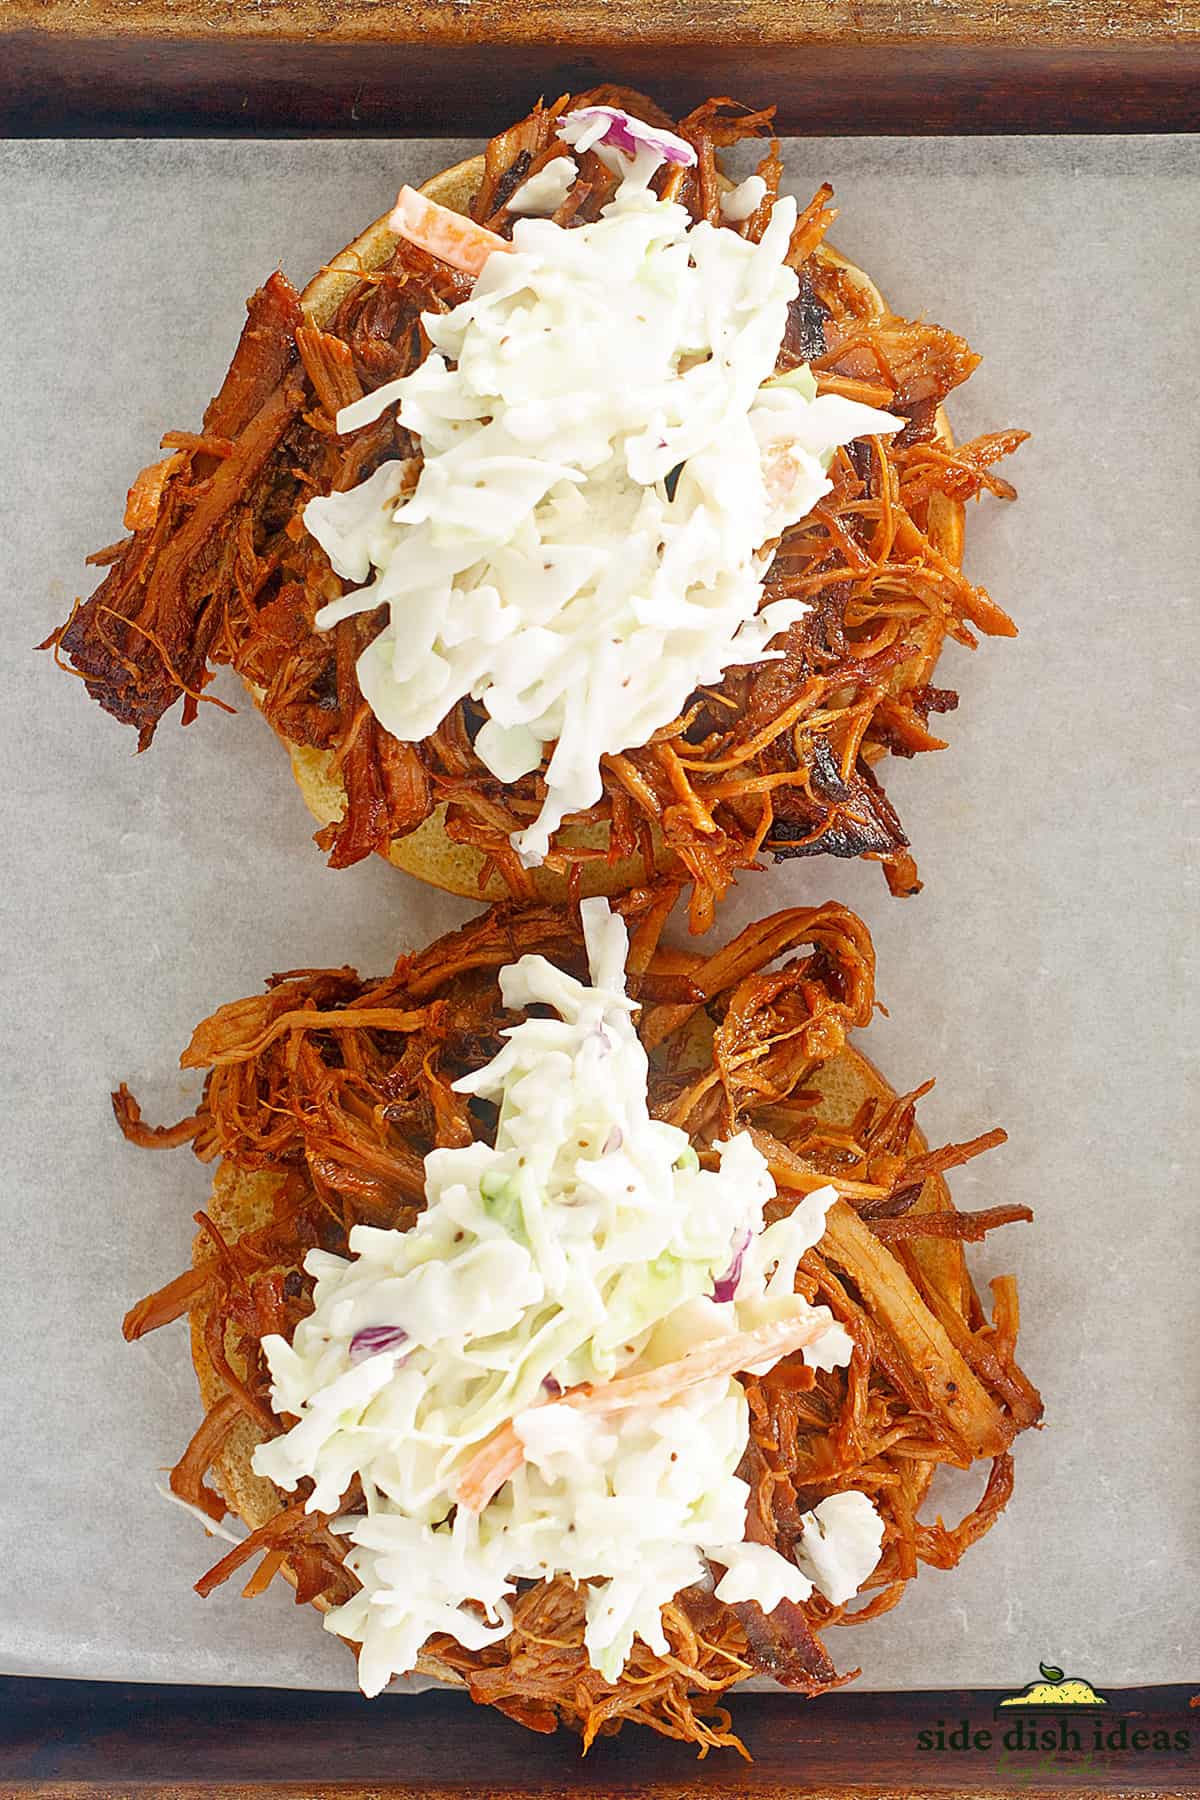 coleslaw on top of two pulled pork sandwiches